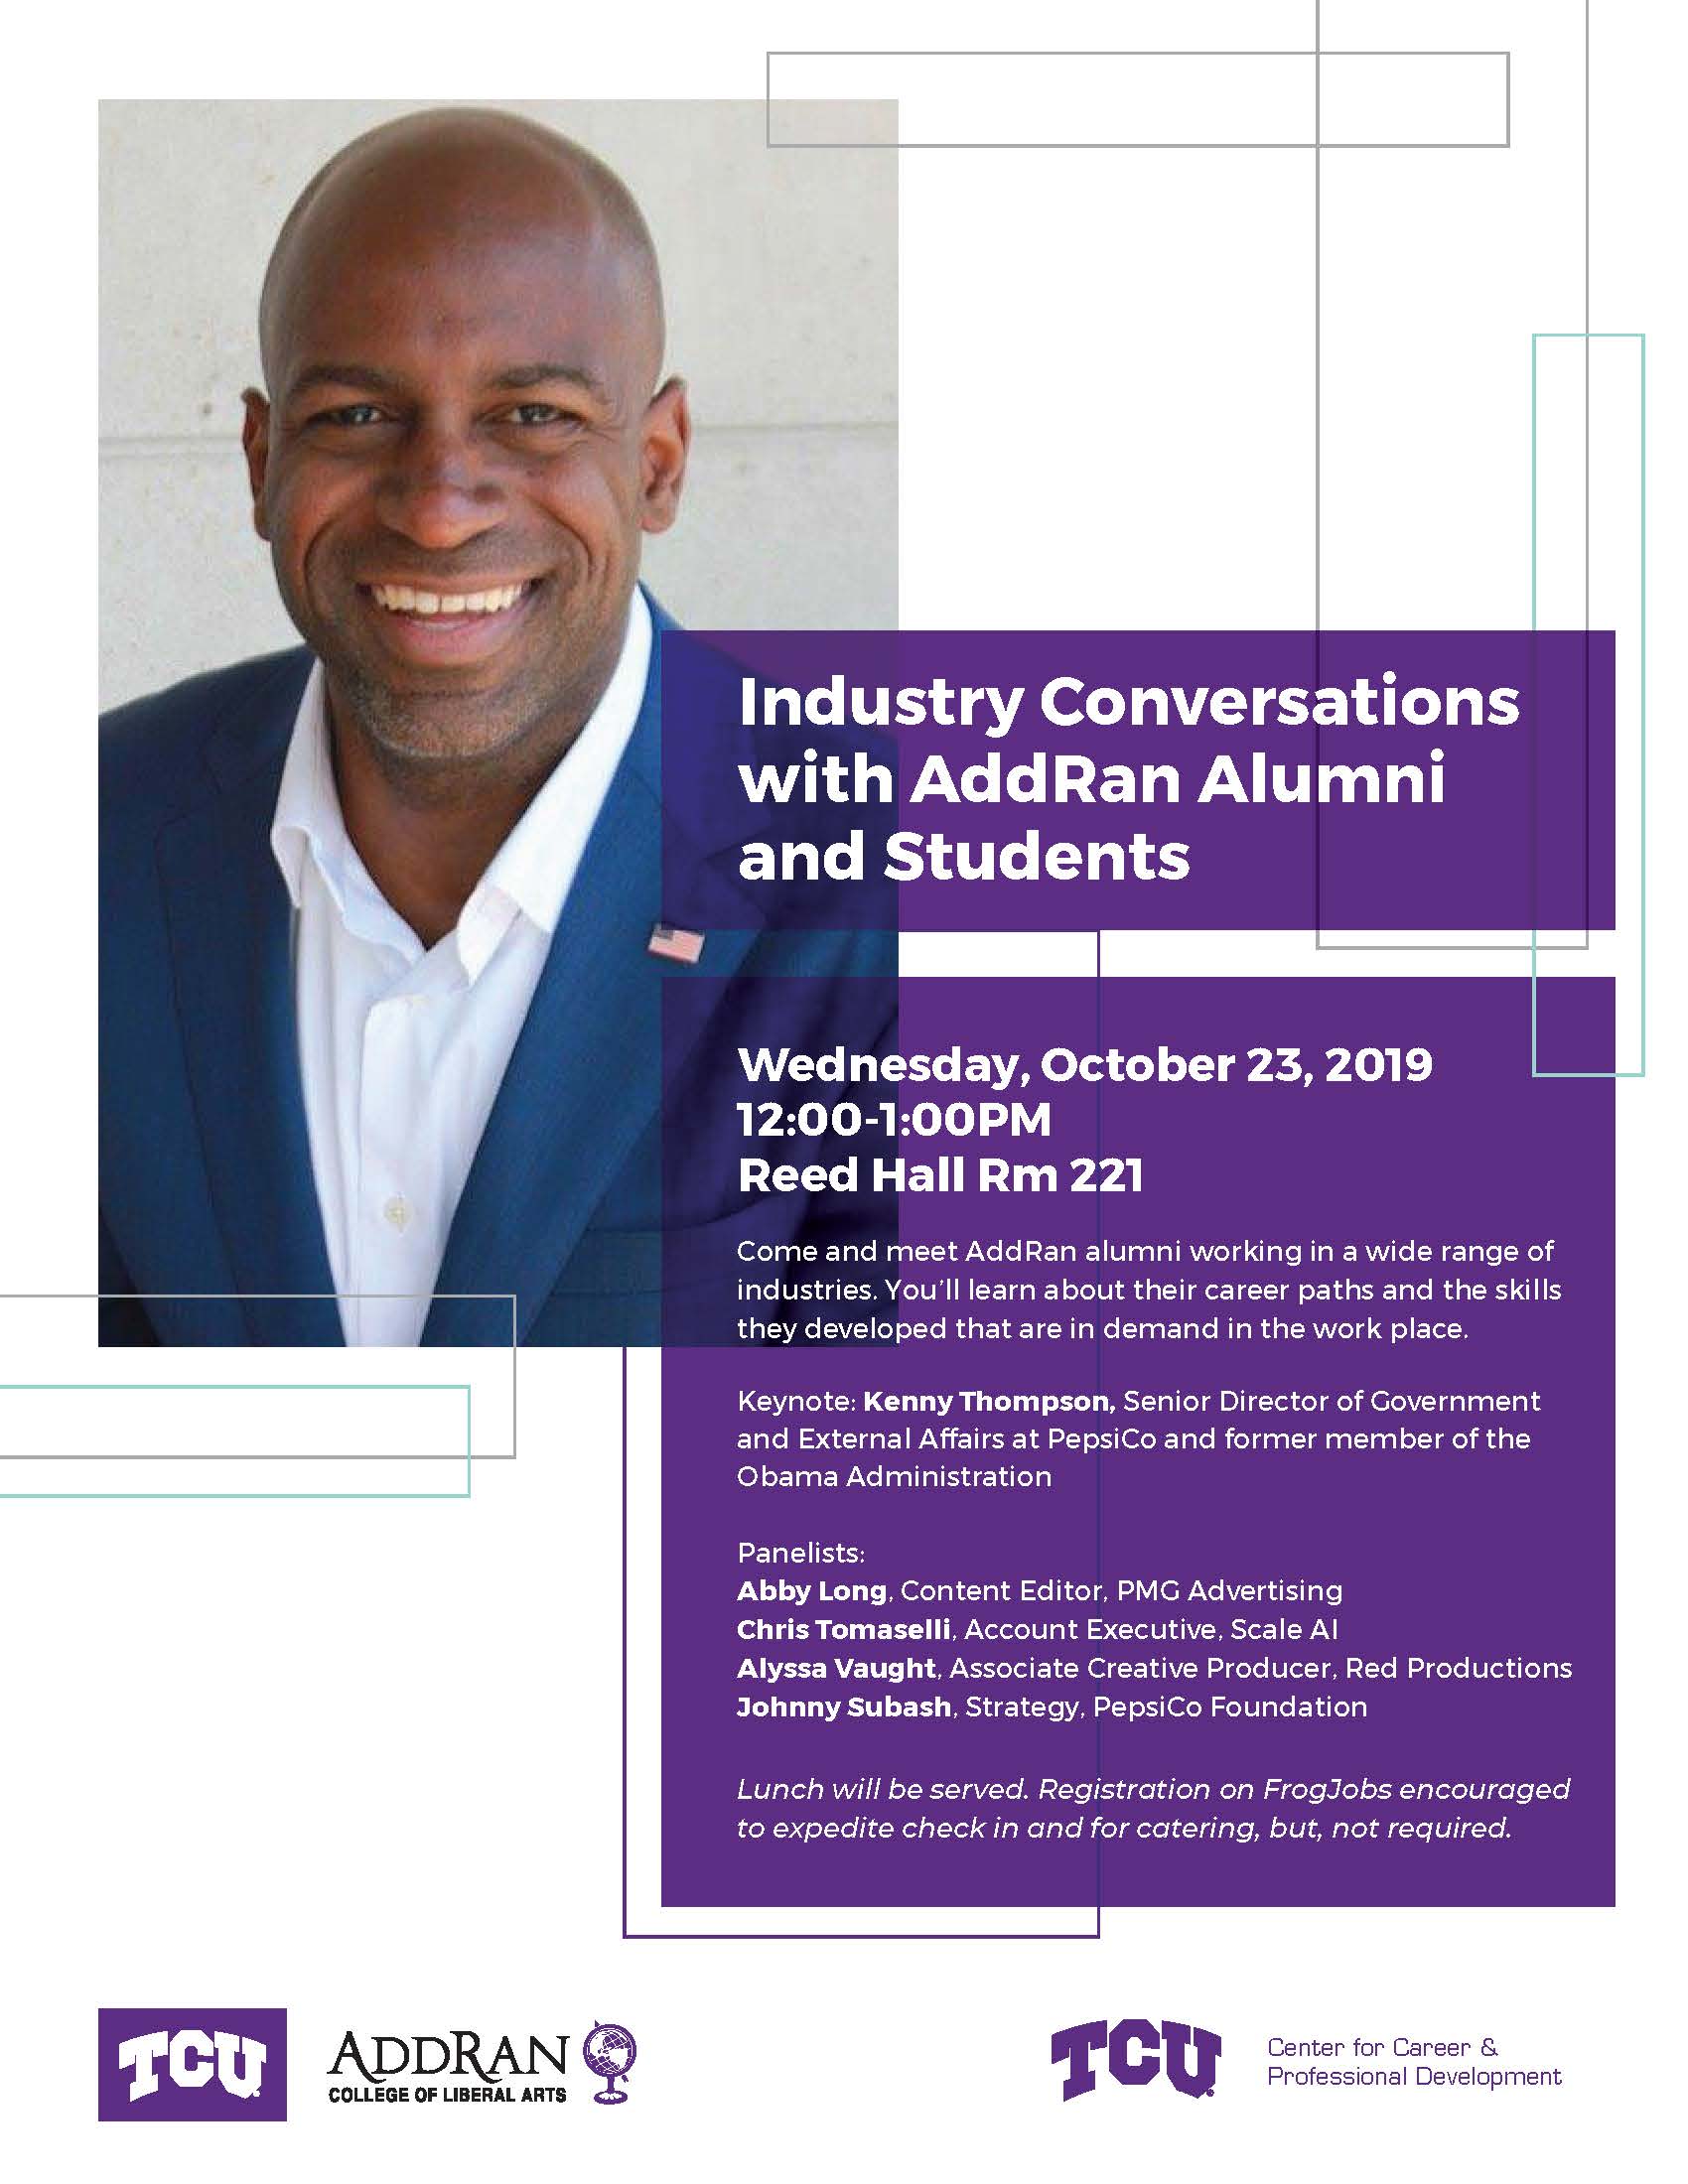 Industry Conversations with AddRanAlumni